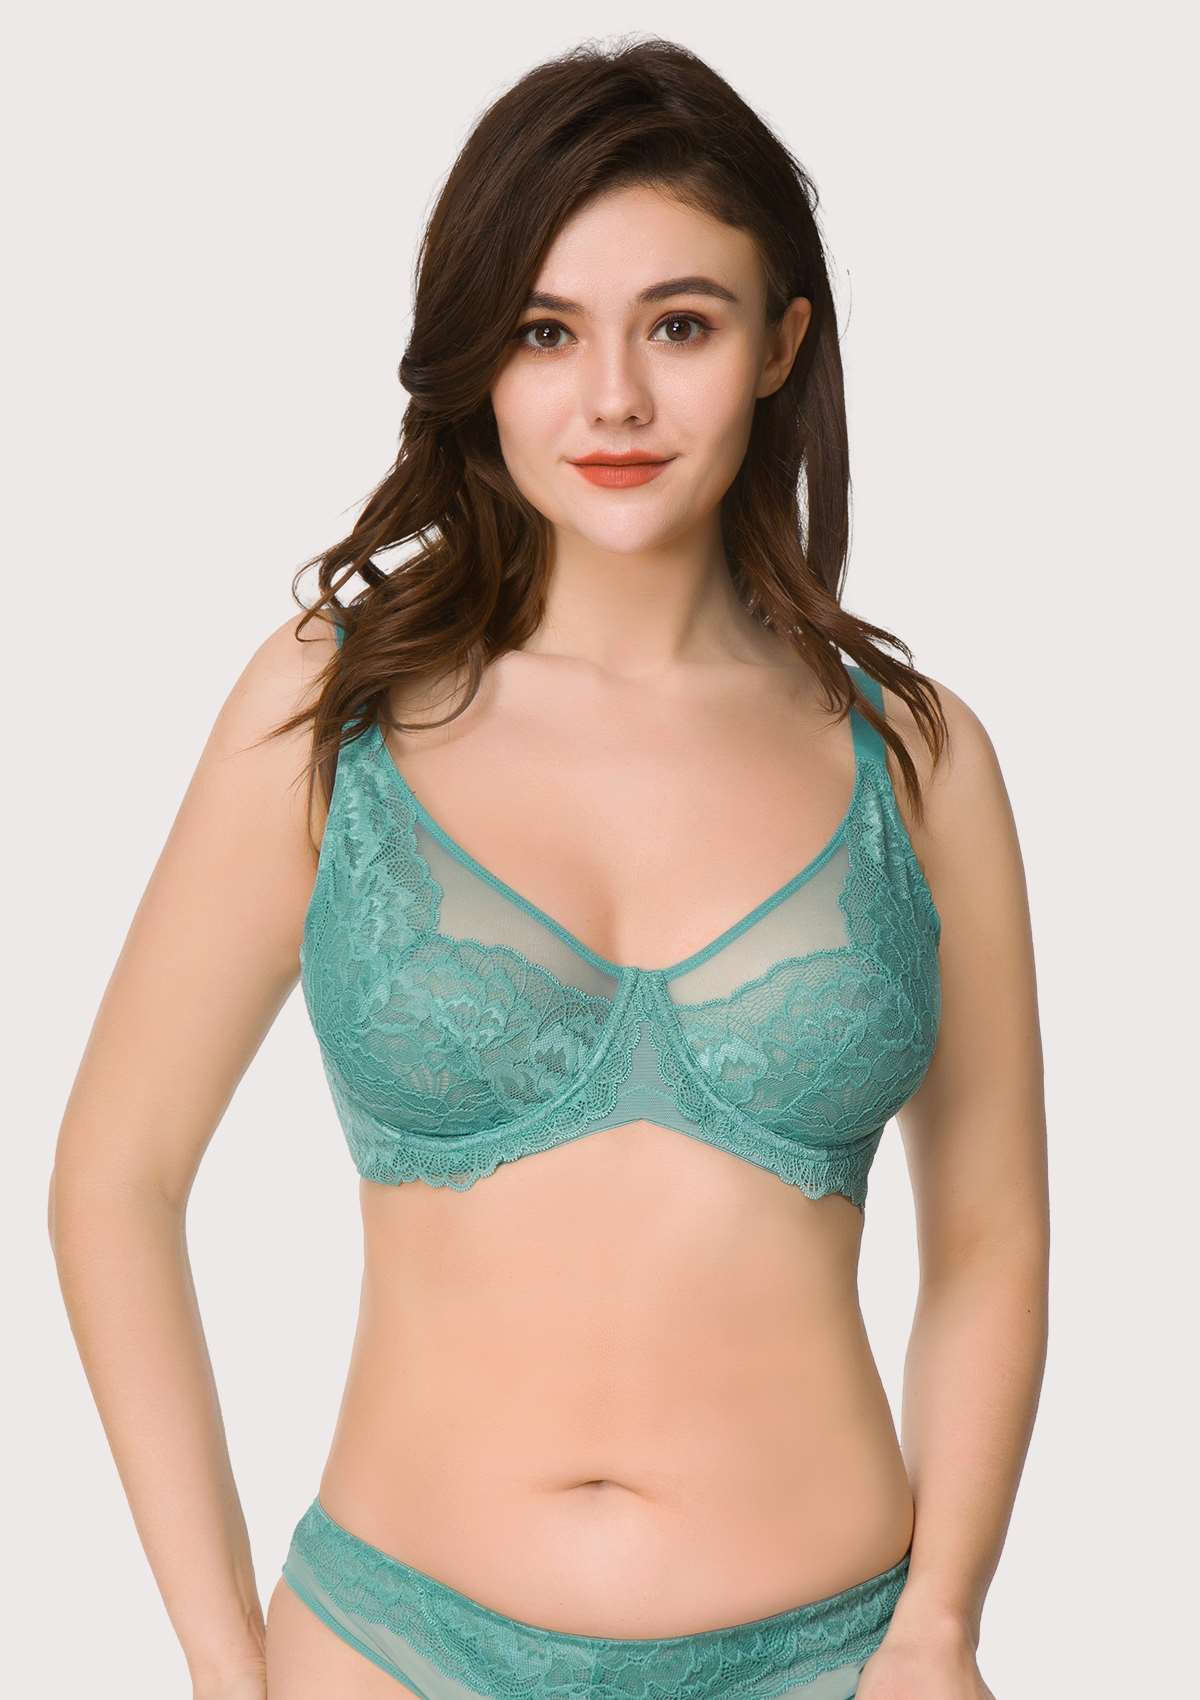 HSIA Peony Lace Unlined Supportive Underwire Bra - Dark Blue / 36 / C